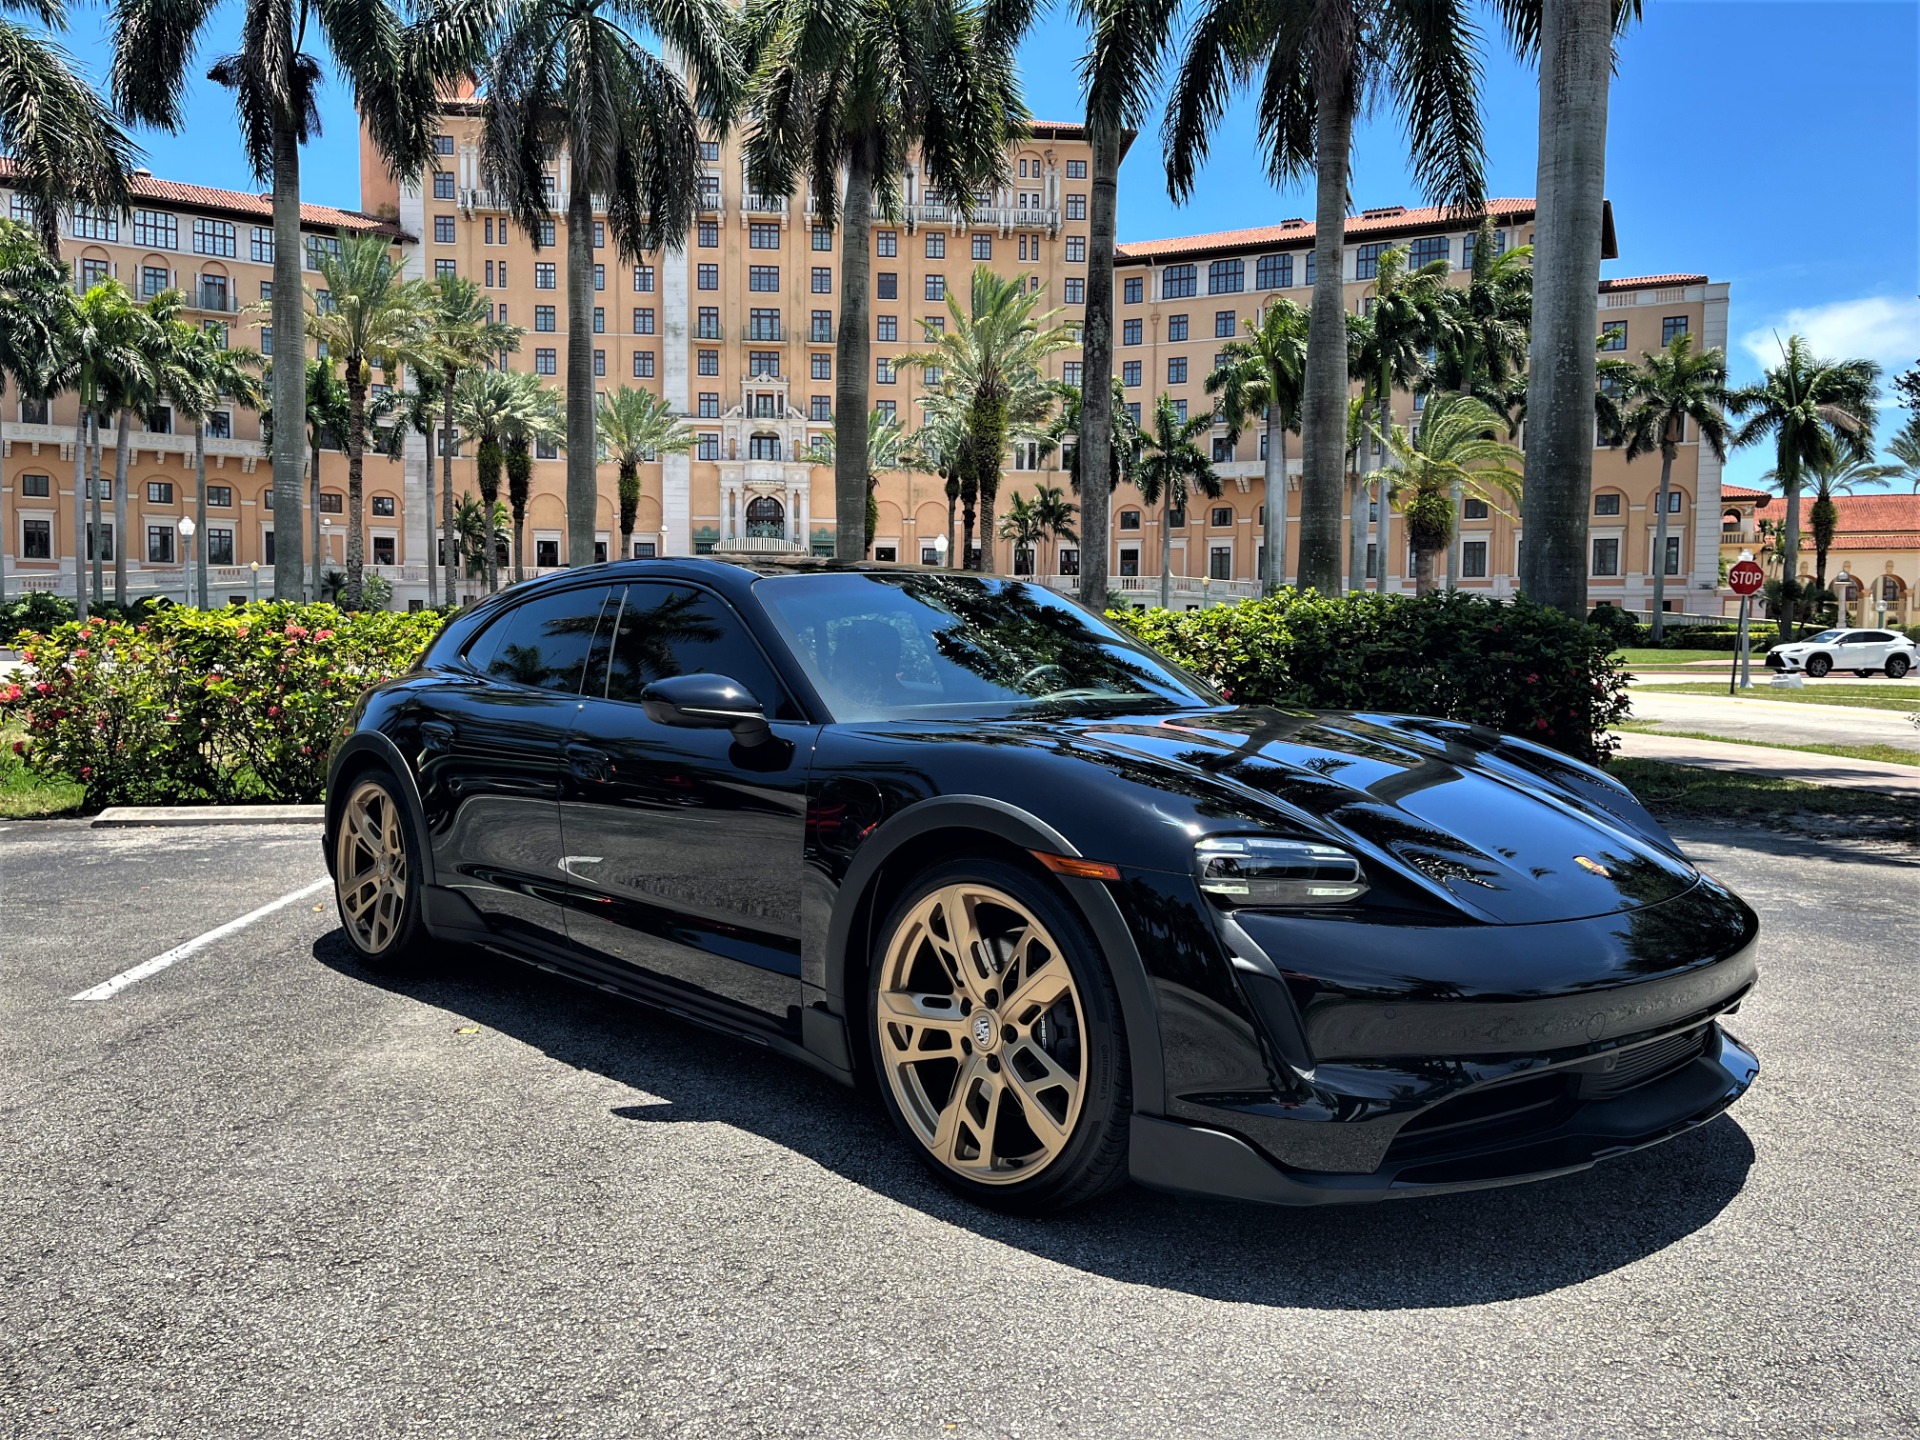 Used 2022 Porsche Taycan 4 Cross Turismo for sale $136,850 at The Gables Sports Cars in Miami FL 33146 2